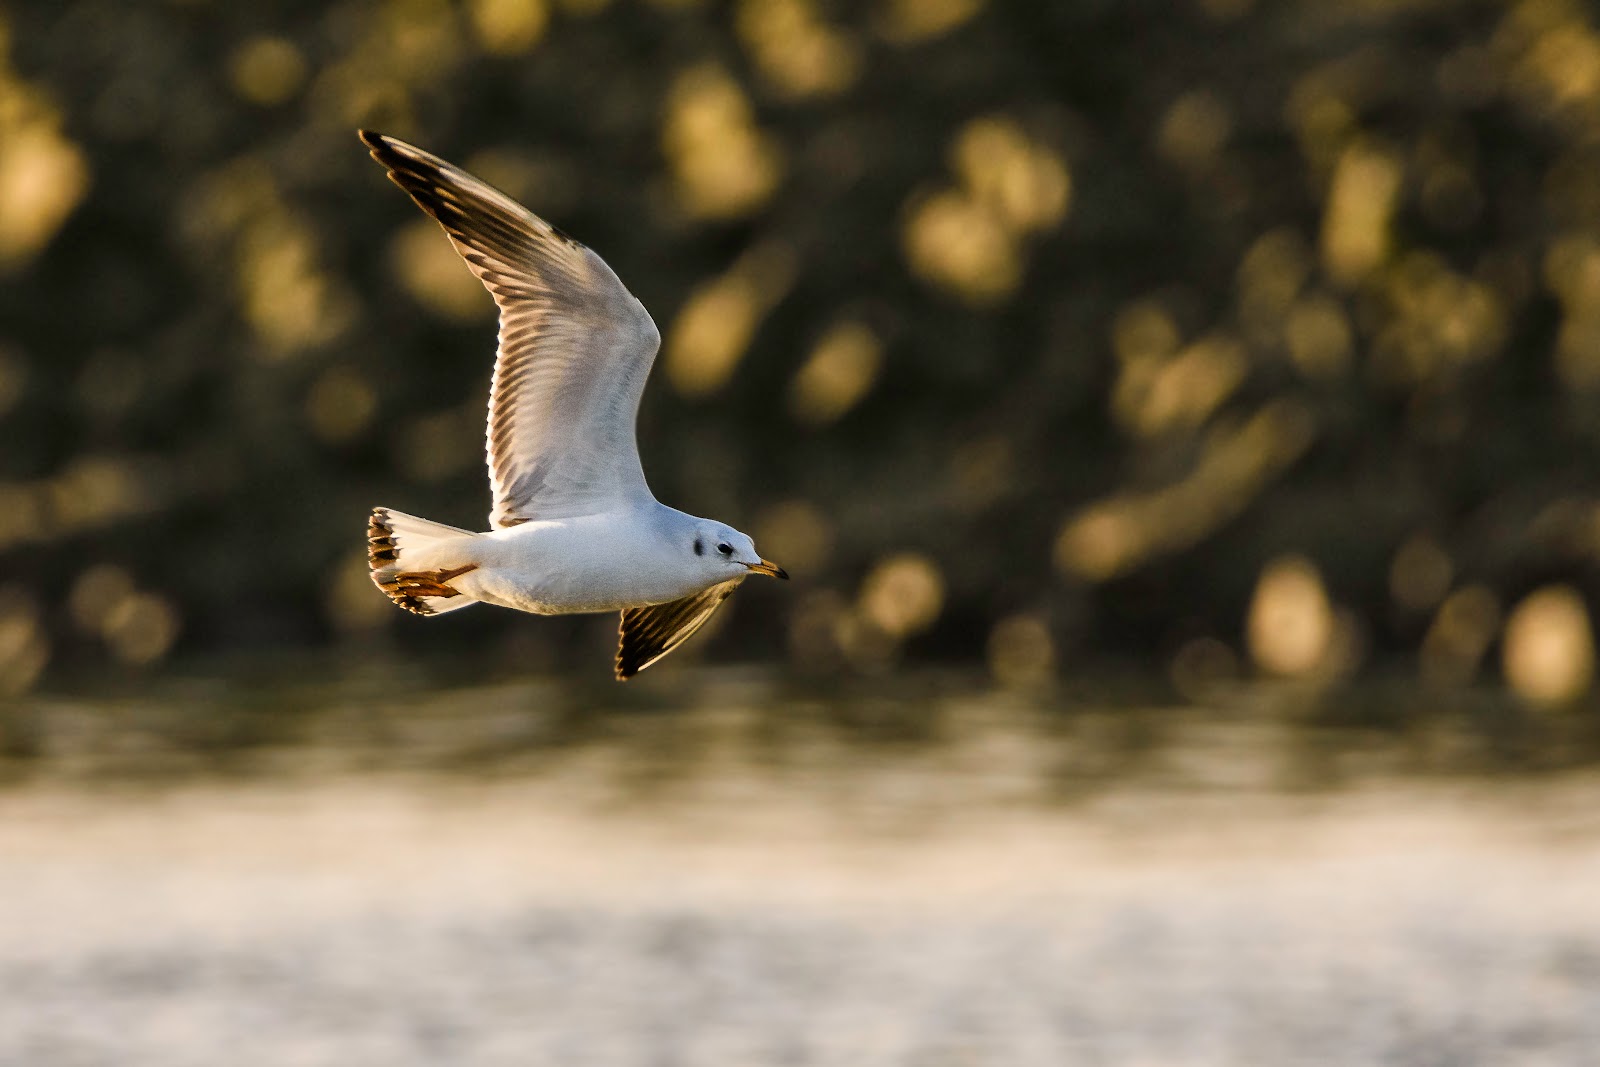 Claes`s Photo blog: how to get Shallow depth of field in birds in ...